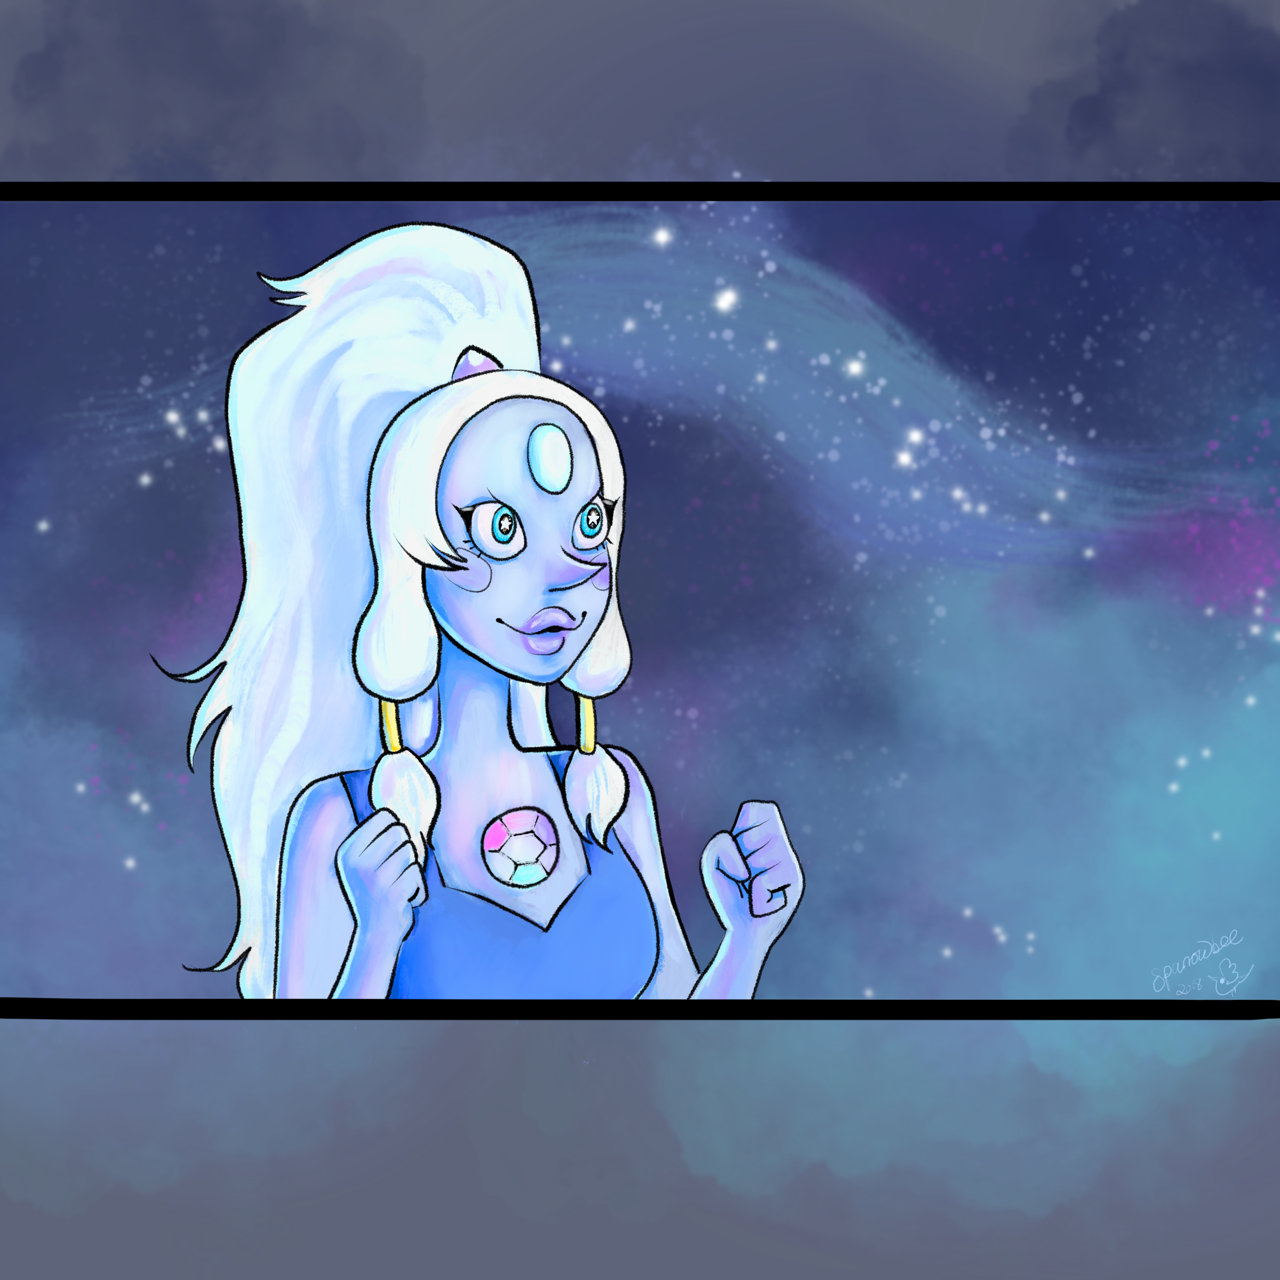 Opal screenshot, from episode ‘Log Date 7 15 2nd First time playing around with Procreate on the iPad Pro! Went looking for a Peridot but decided to draw my favourite fusion because she is a giant...